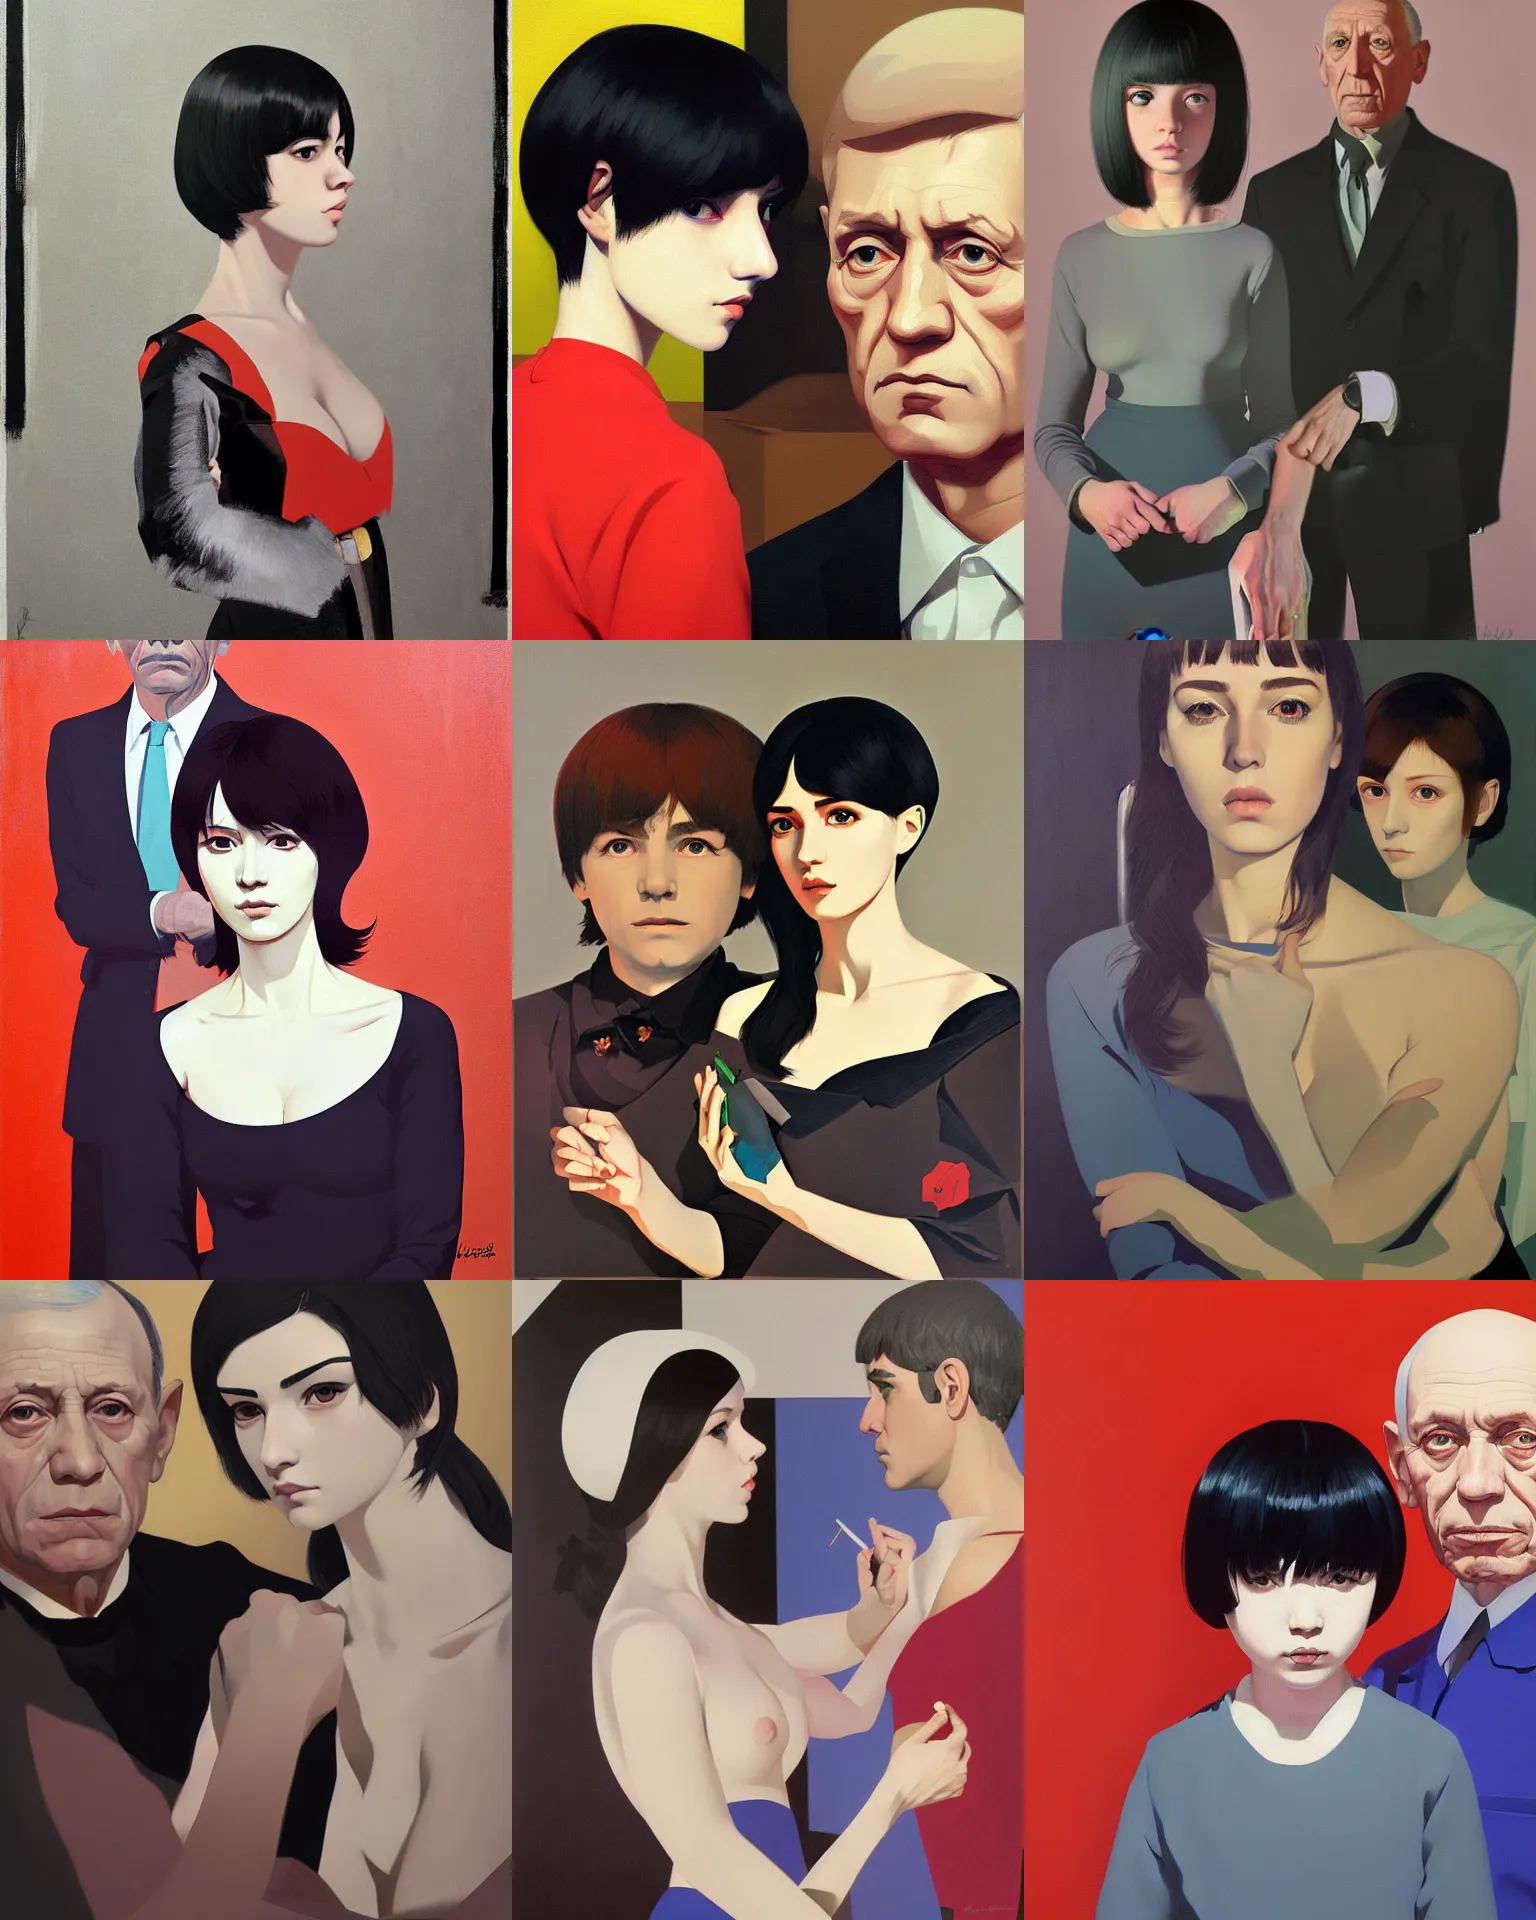 Prompt: A portrait painted by Ilya Kuvshinov and Pablo Picasso